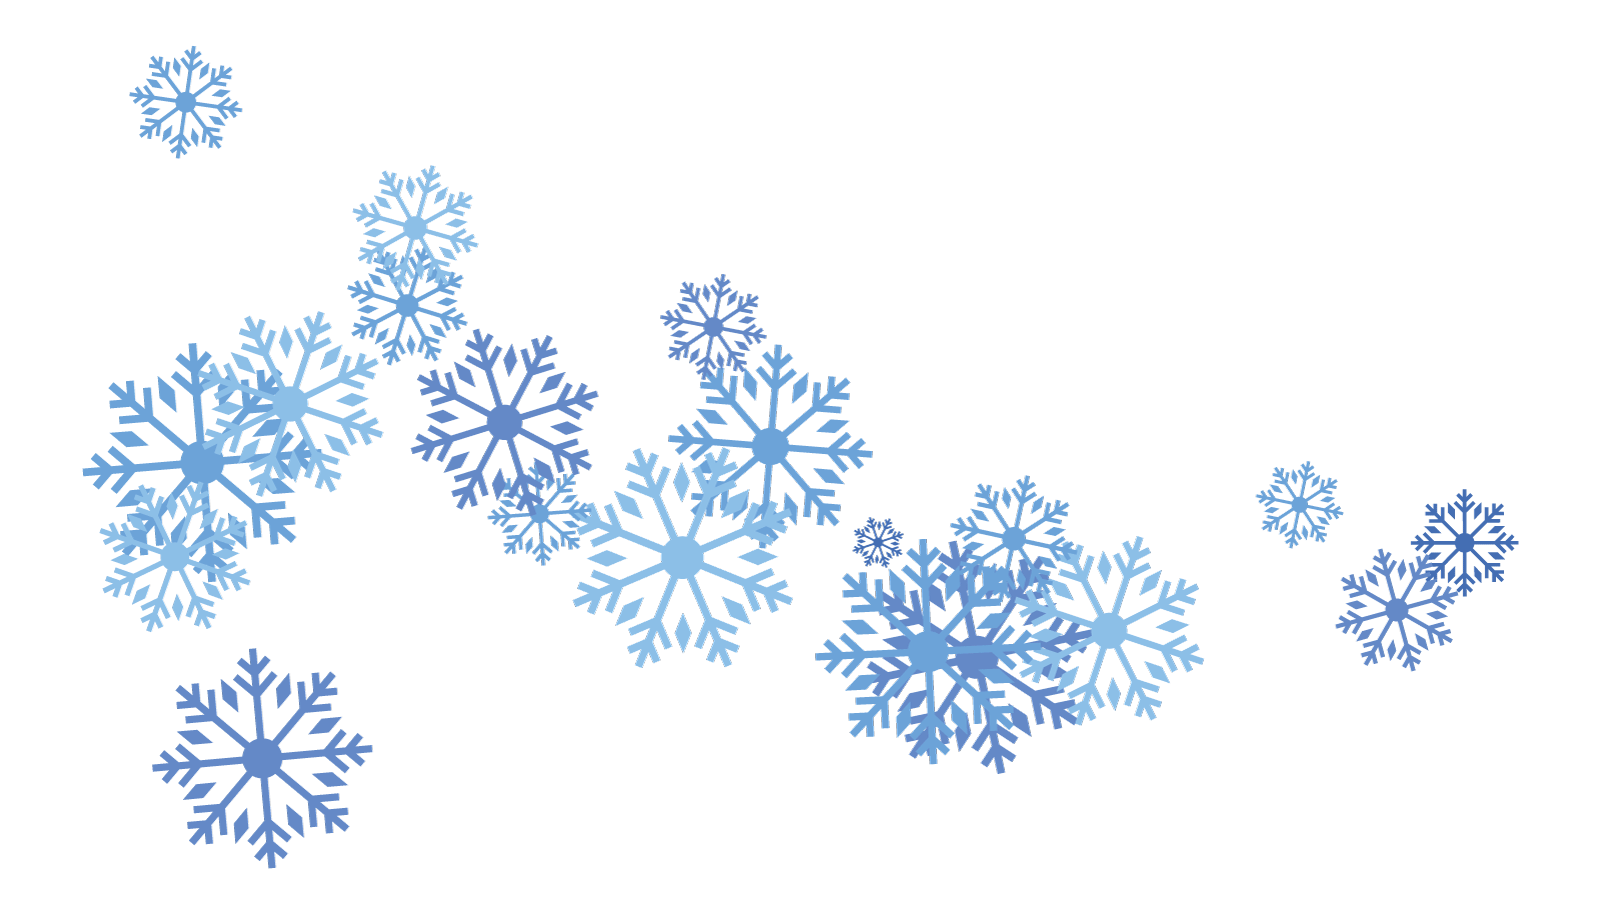 Snowflakes background illustration snowfall vector template